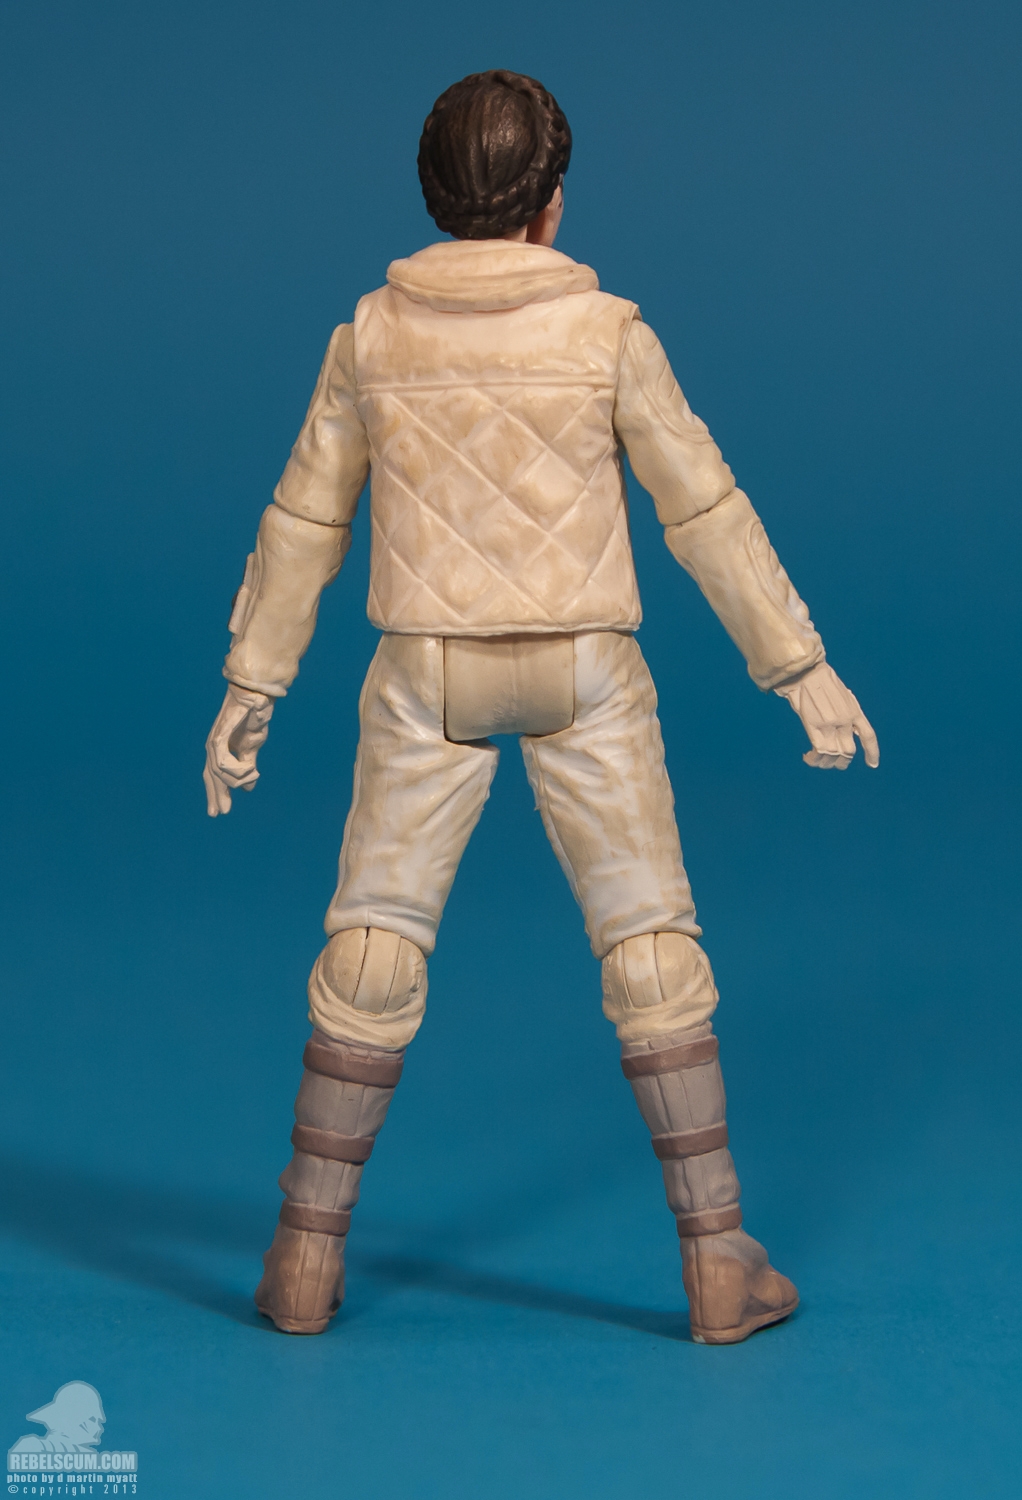 Leia_Hoth_Outfit_Vintage_Collection_TVC_VC02-04.jpg